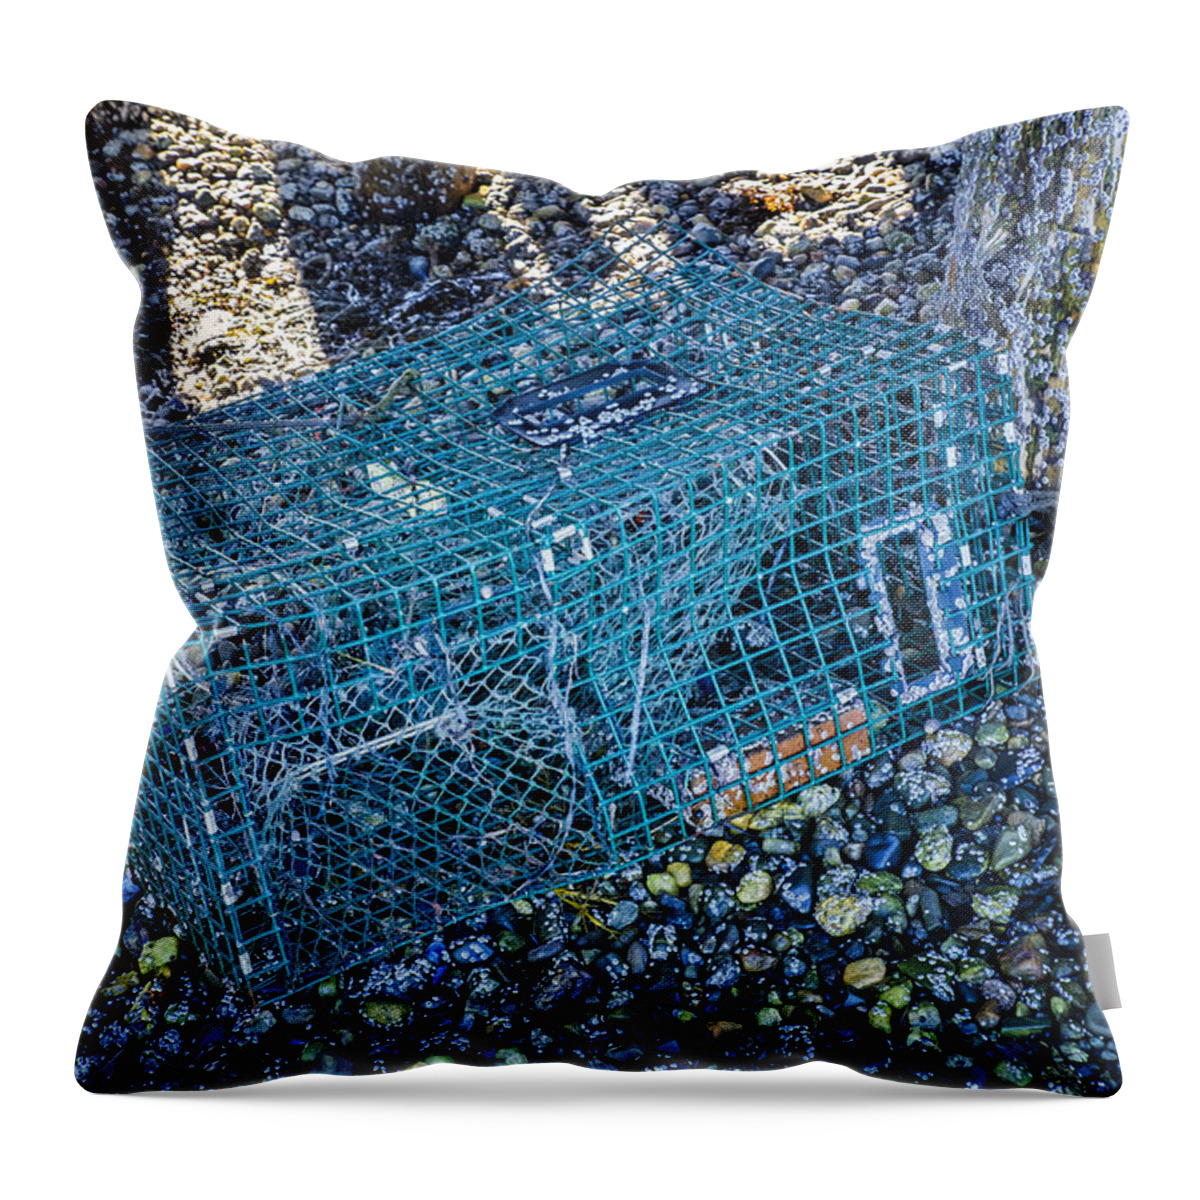 Maine Lobster Boats Throw Pillow featuring the photograph Trap And Barnacles by Tom Singleton